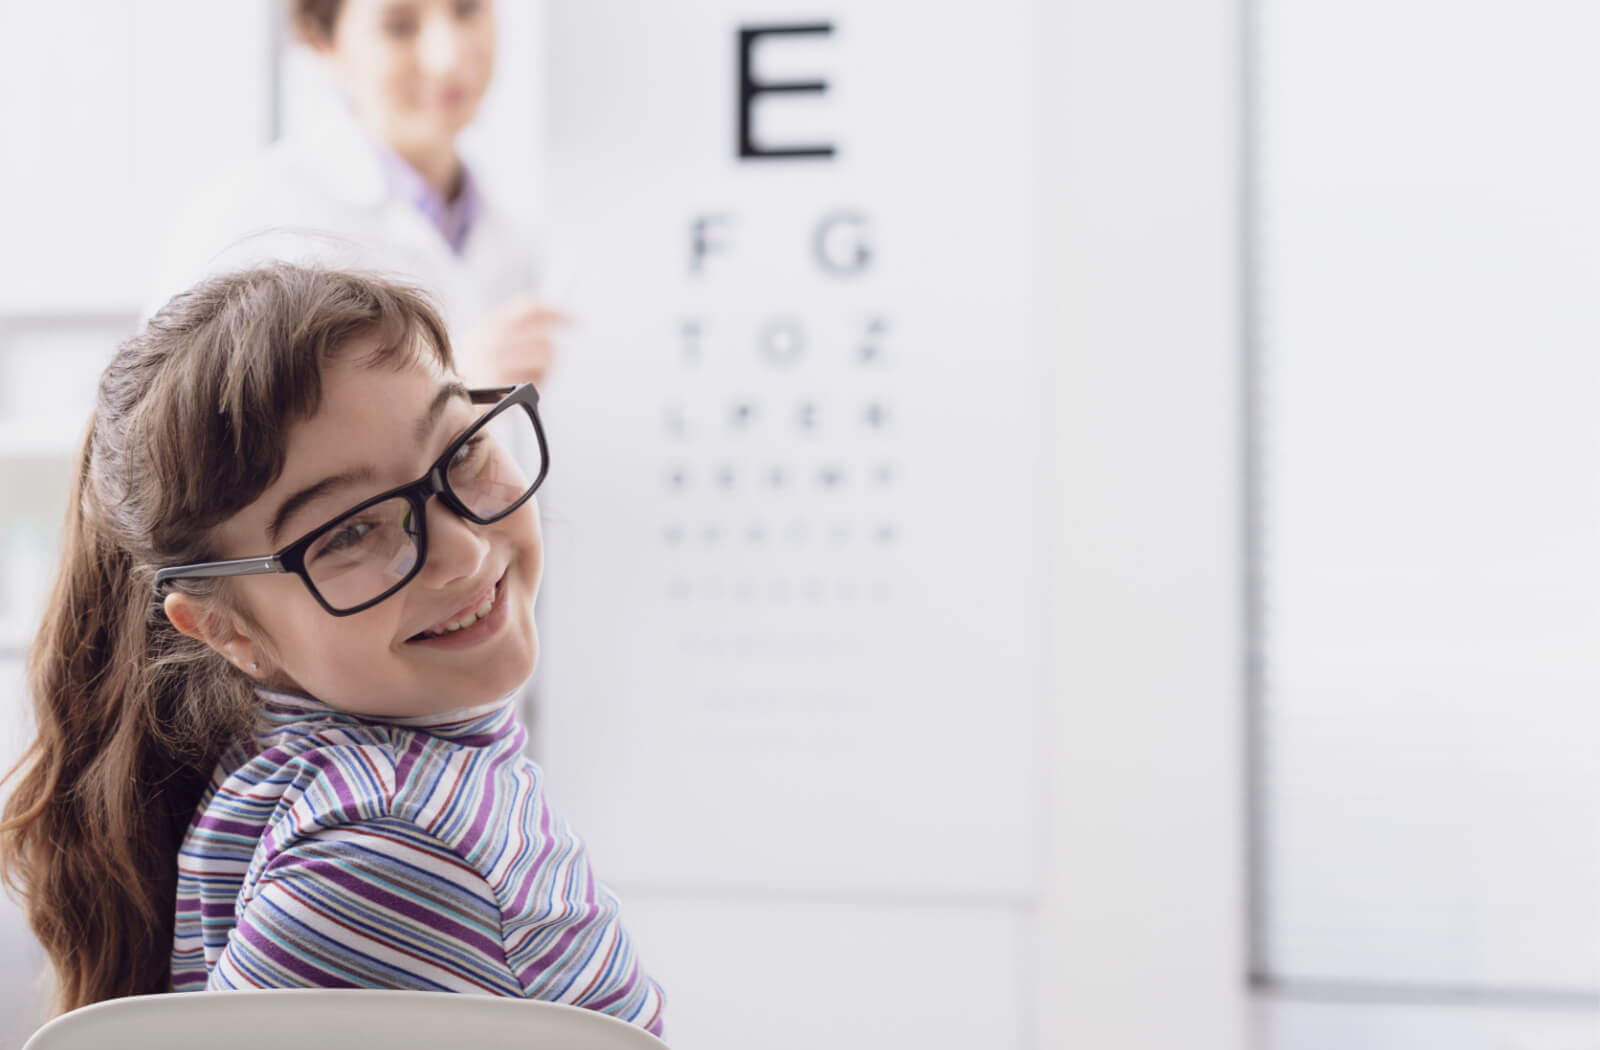 An optometrist conducting an eye exam on a female child with glasses